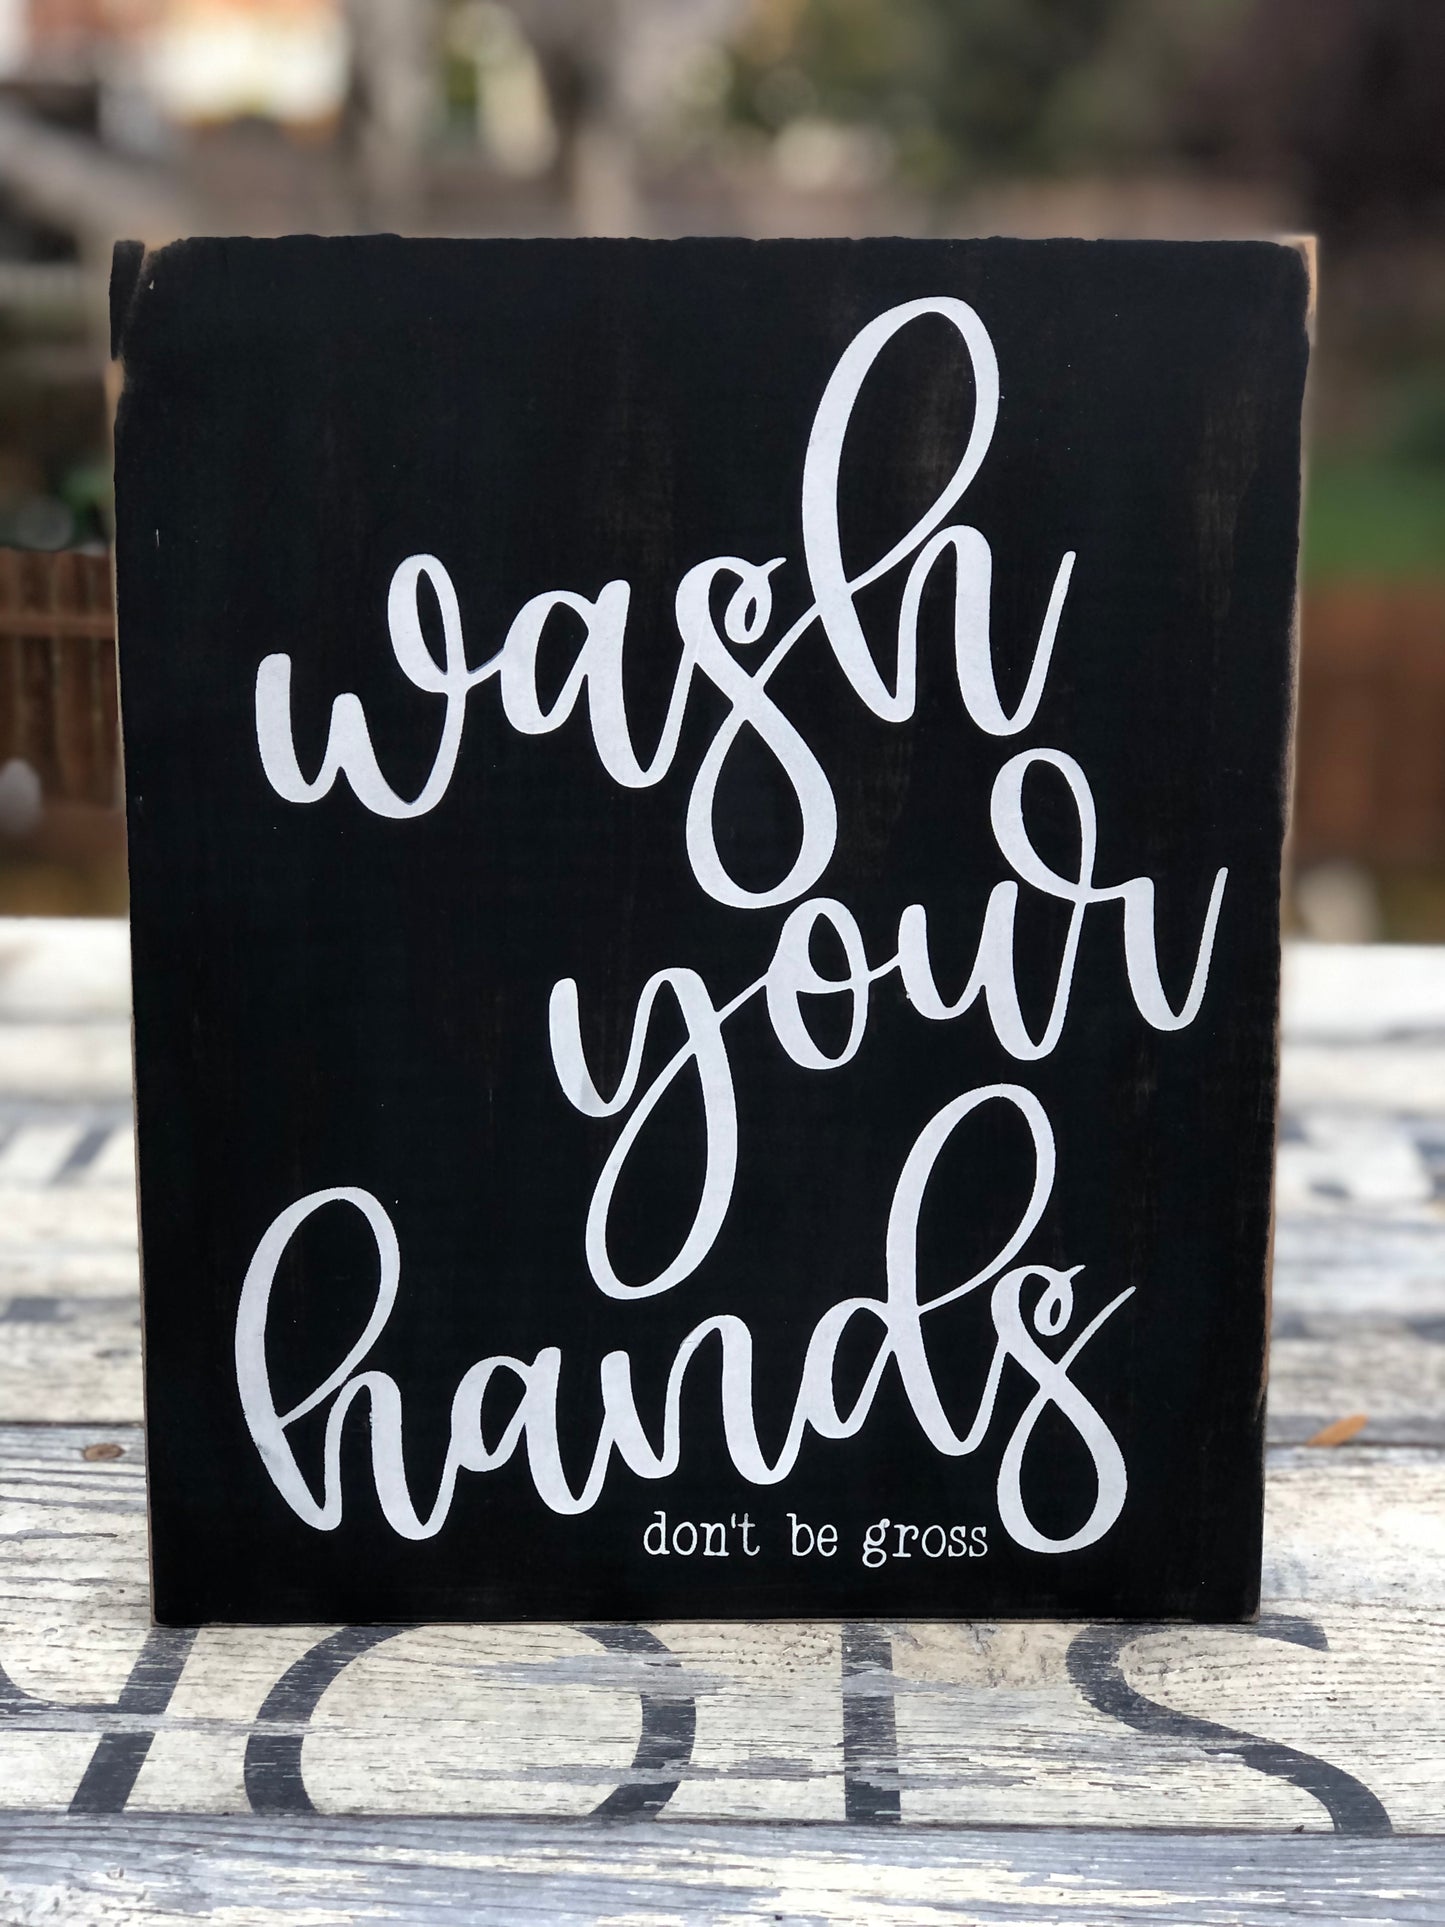 WASH YOUR HANDS - DON'T BE GROSS - WOOD SIGN